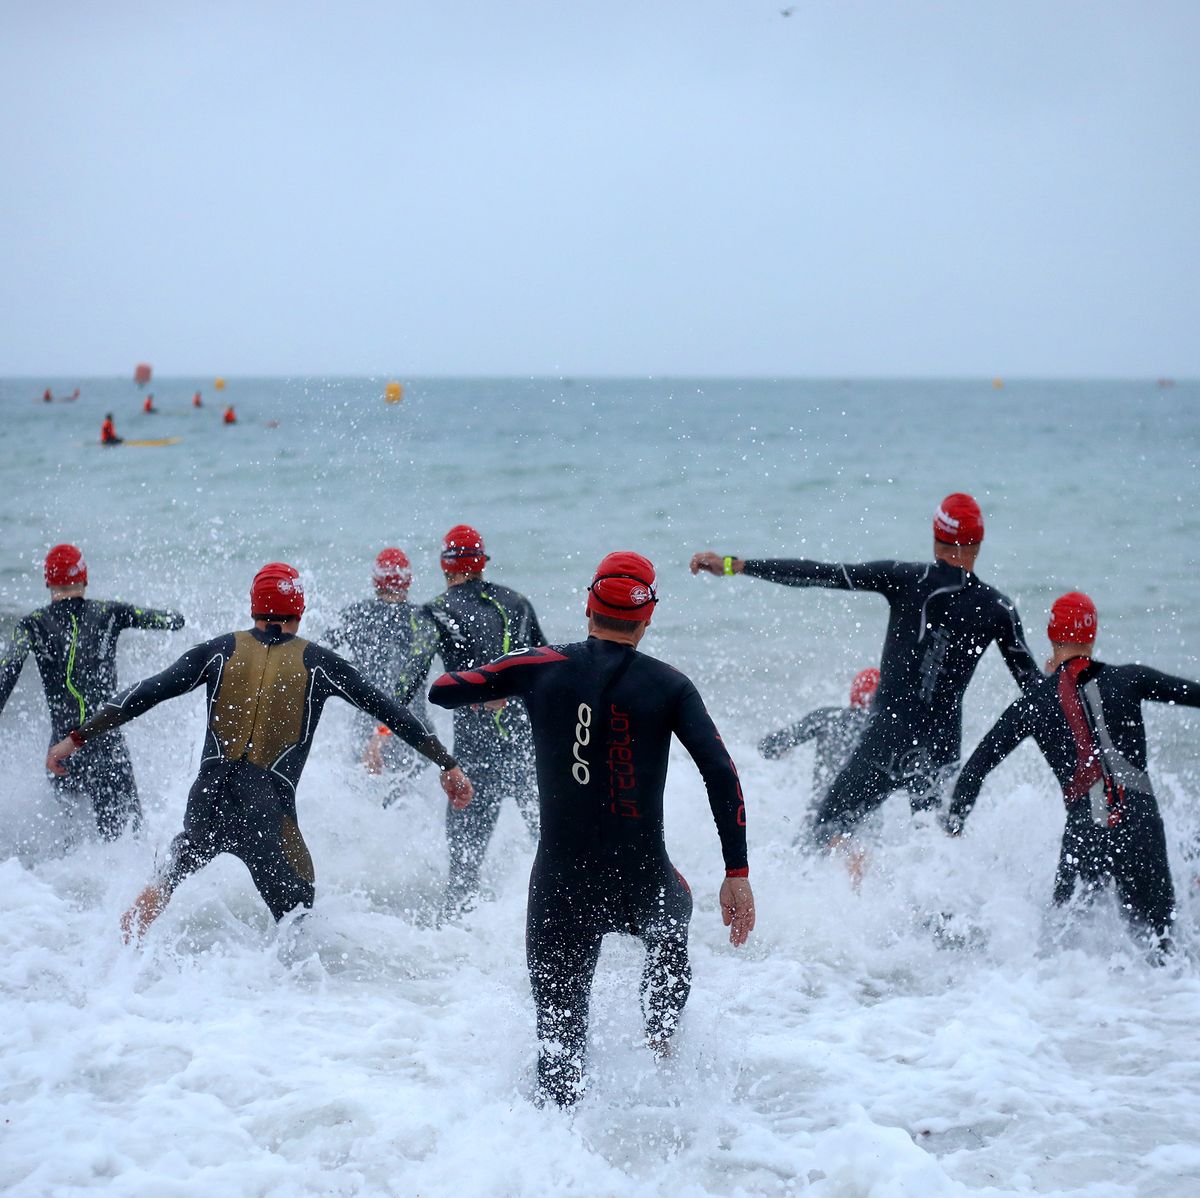 Ironman 70.3: How to train for your first half Ironman